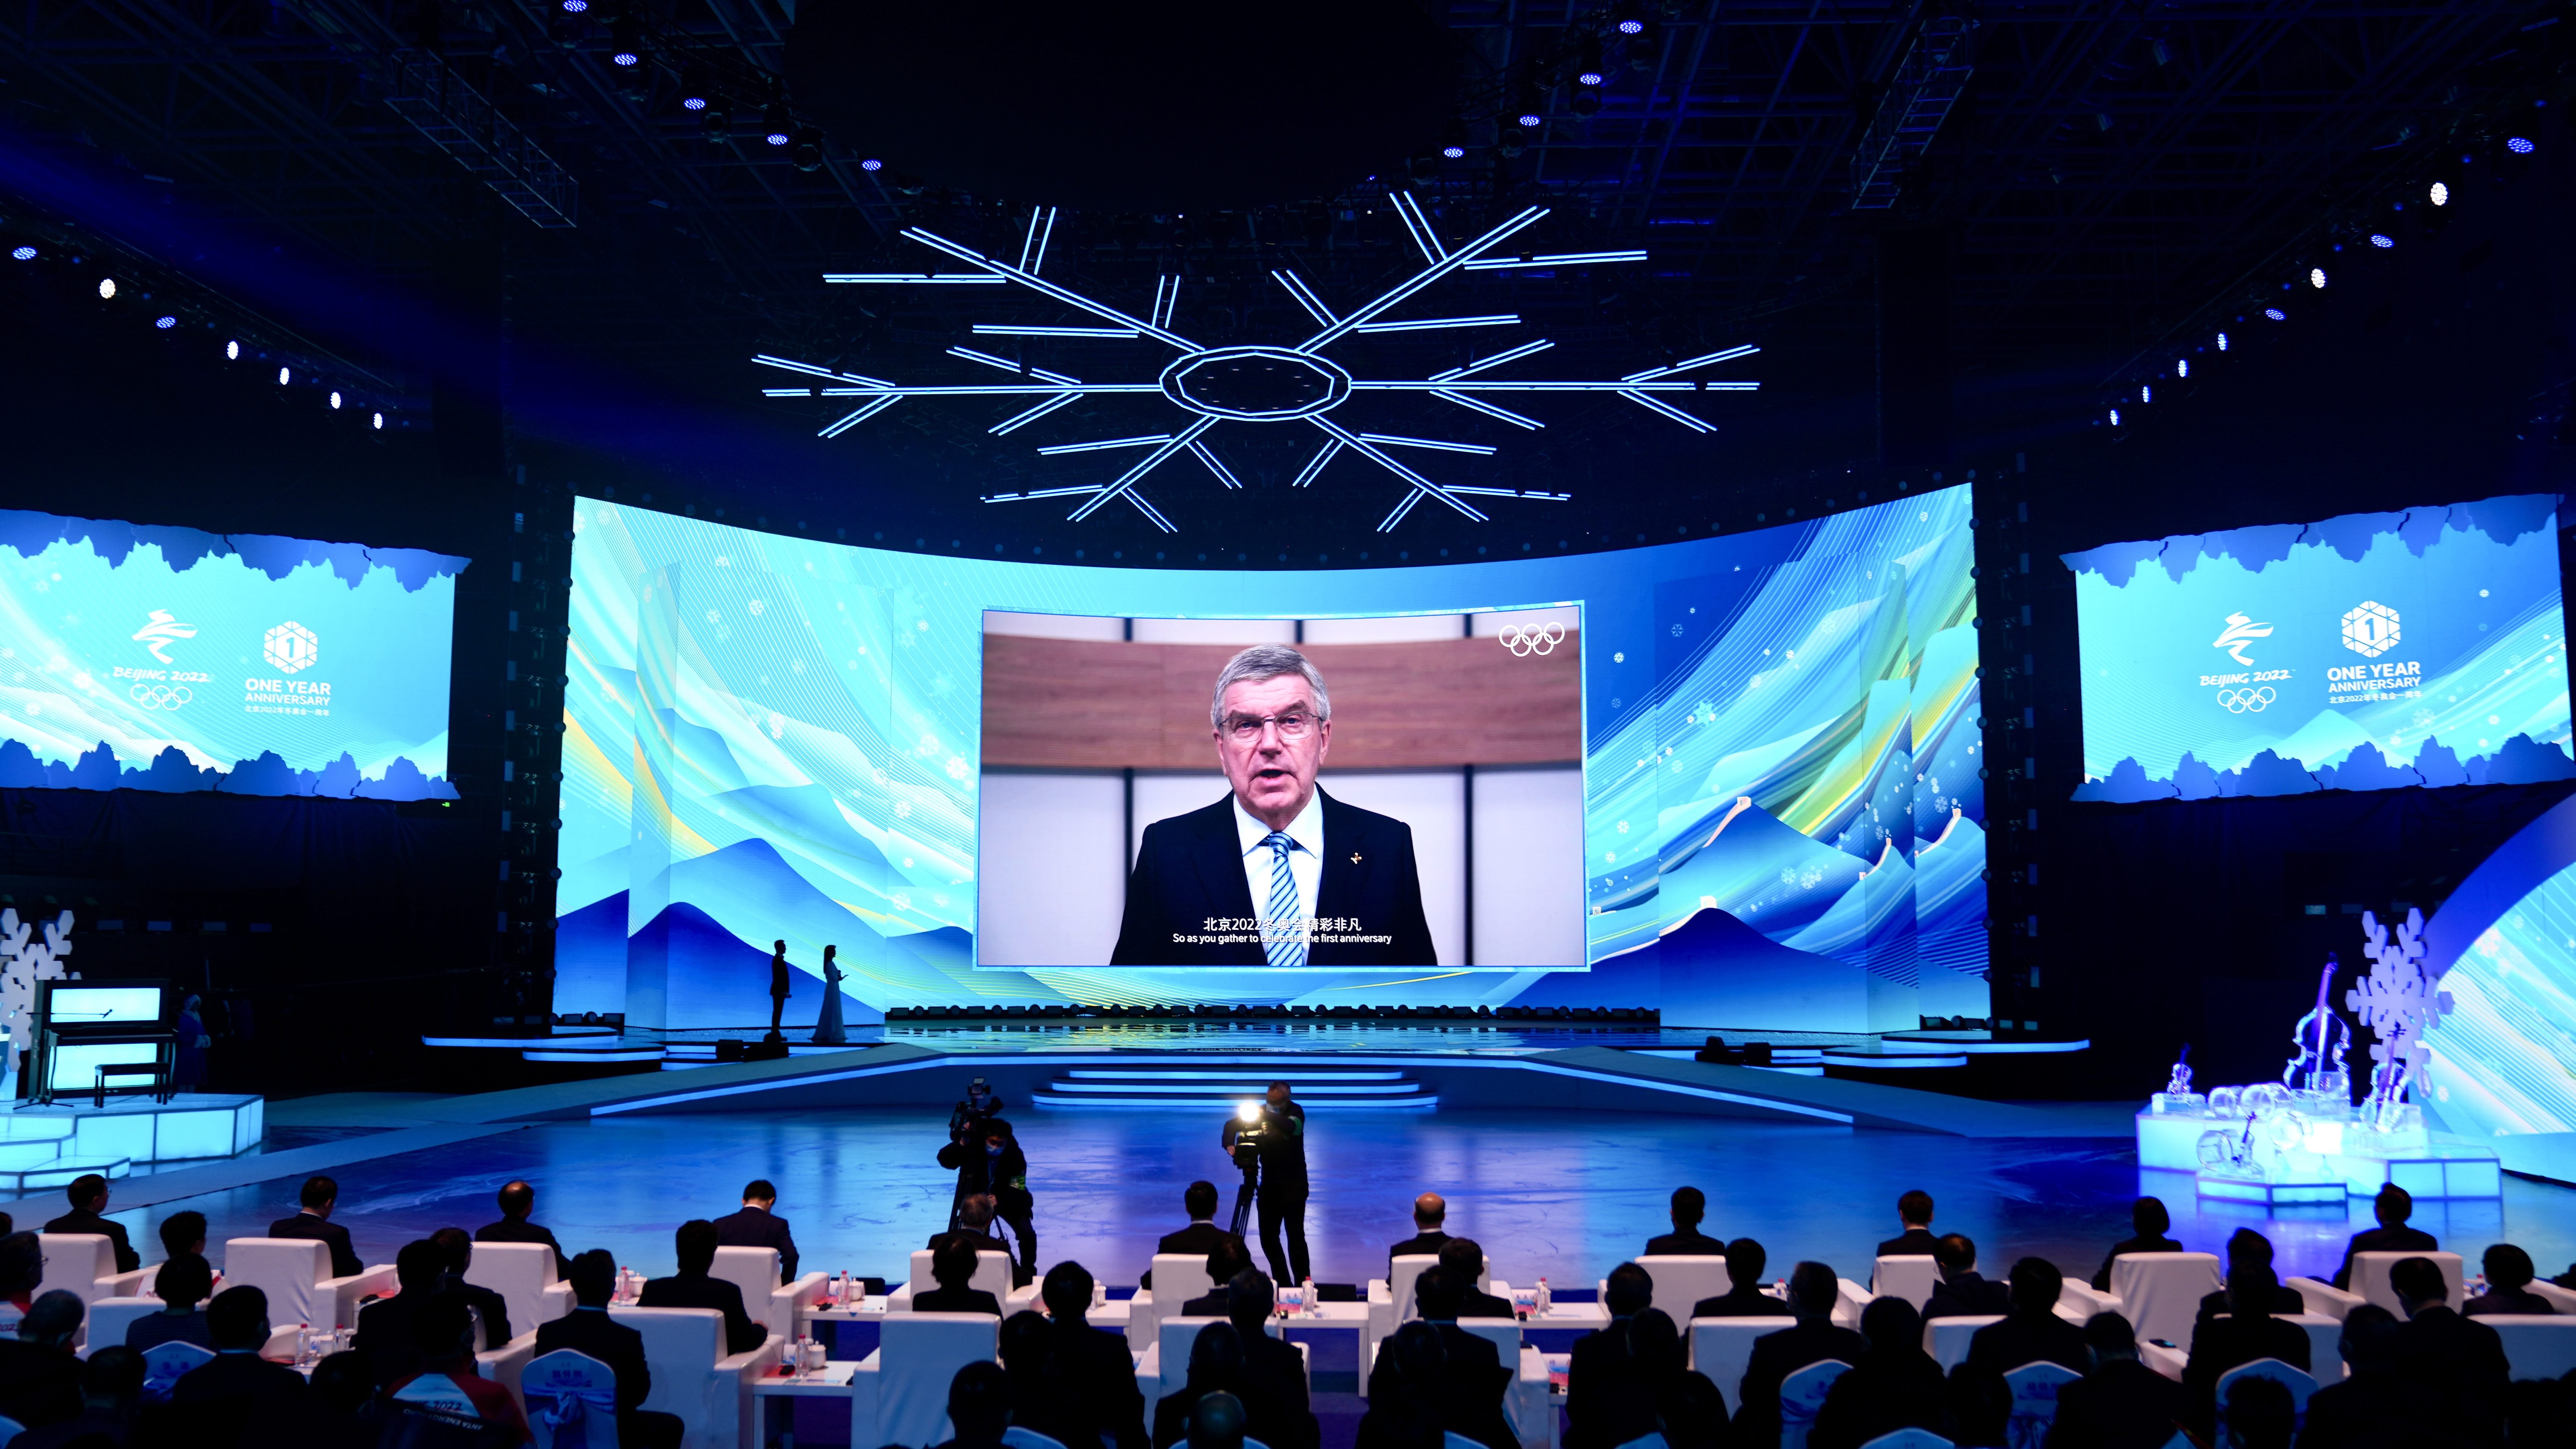 A view of the IOC President Thomas Bach's speech via a video during the ceremony marking the first anniversary of Beijing 2022 Winter Olympic Games in Beijing, China, February 4, 2023. /CGTN